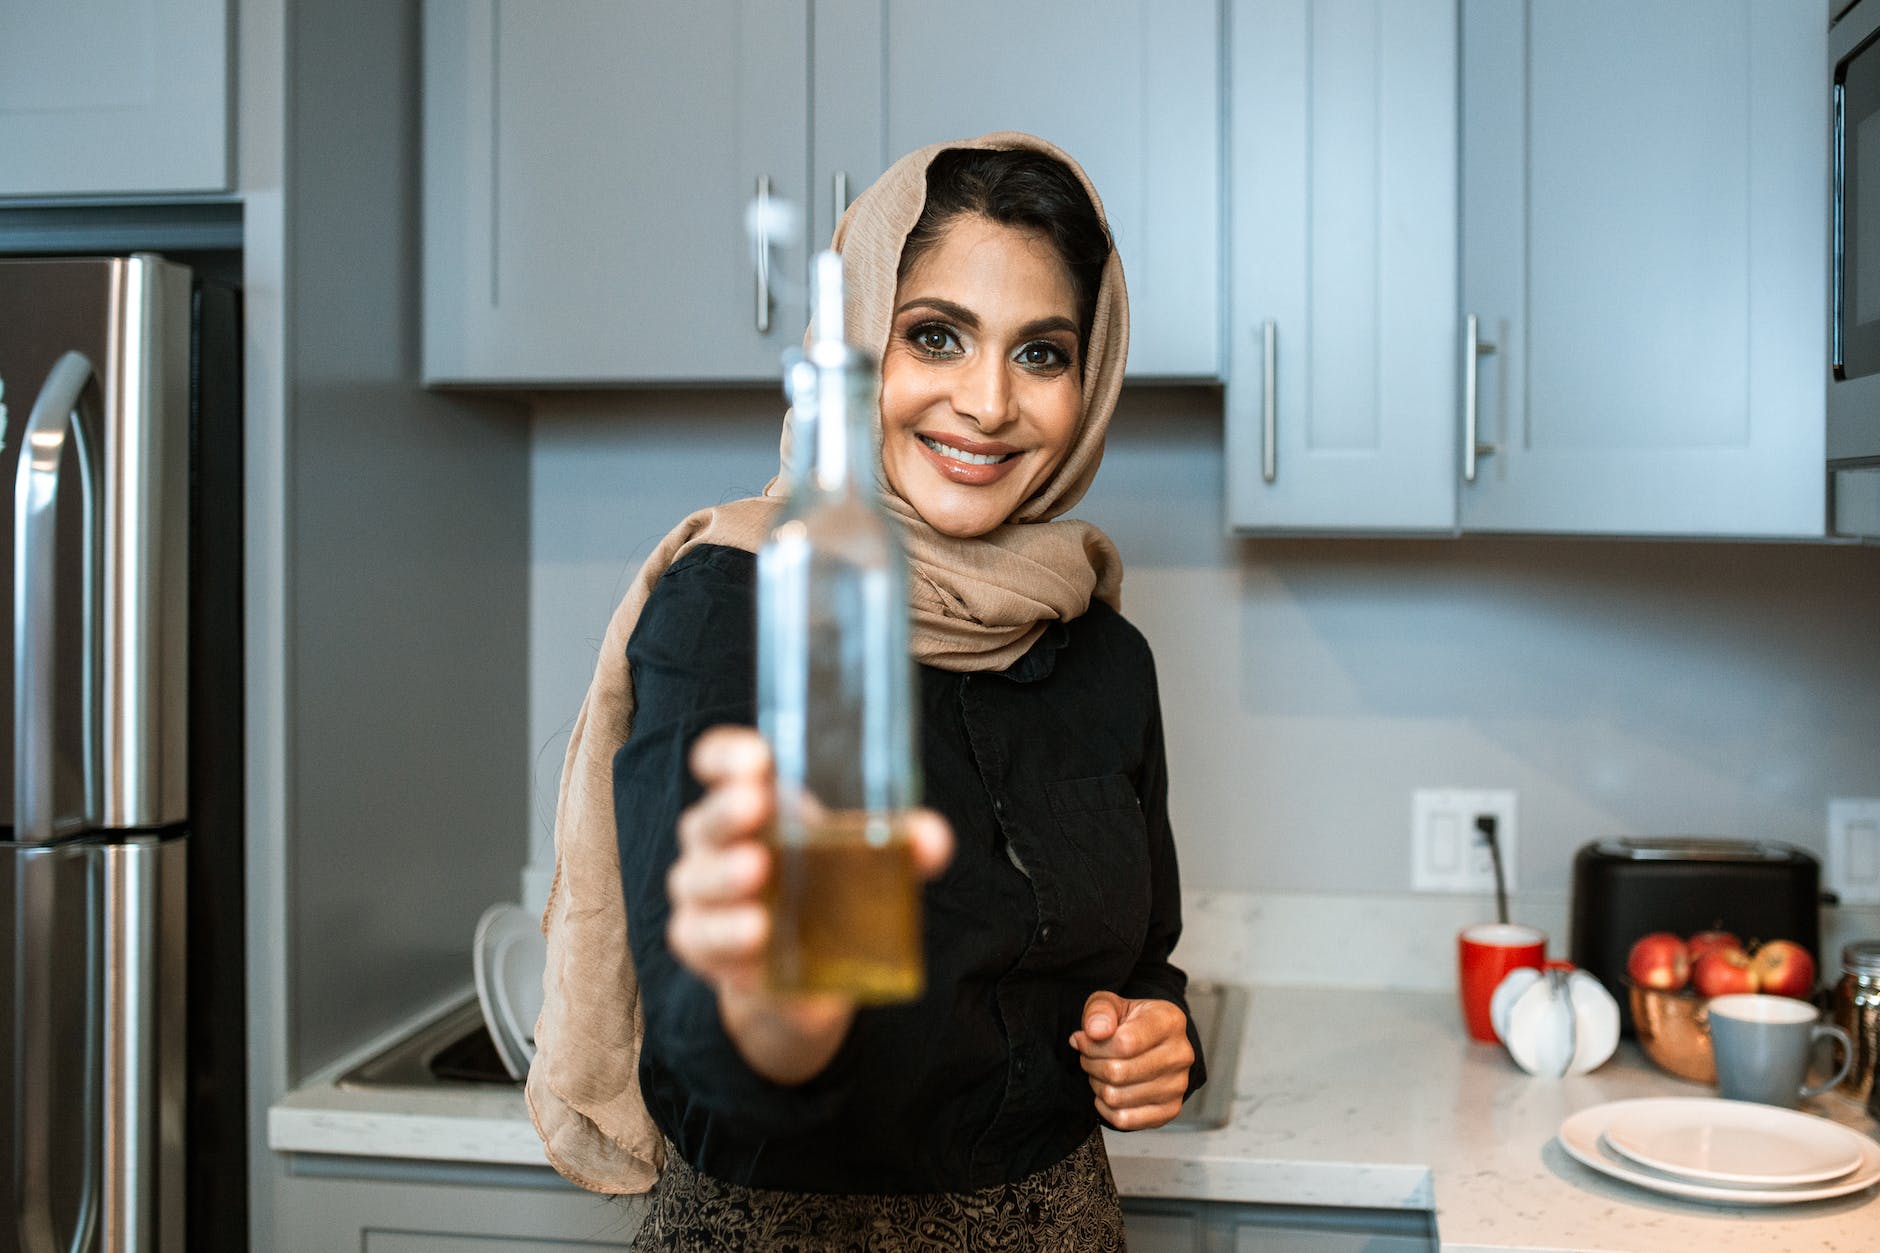 cheerful ethnic woman demonstrating bottle of oil in kitchen